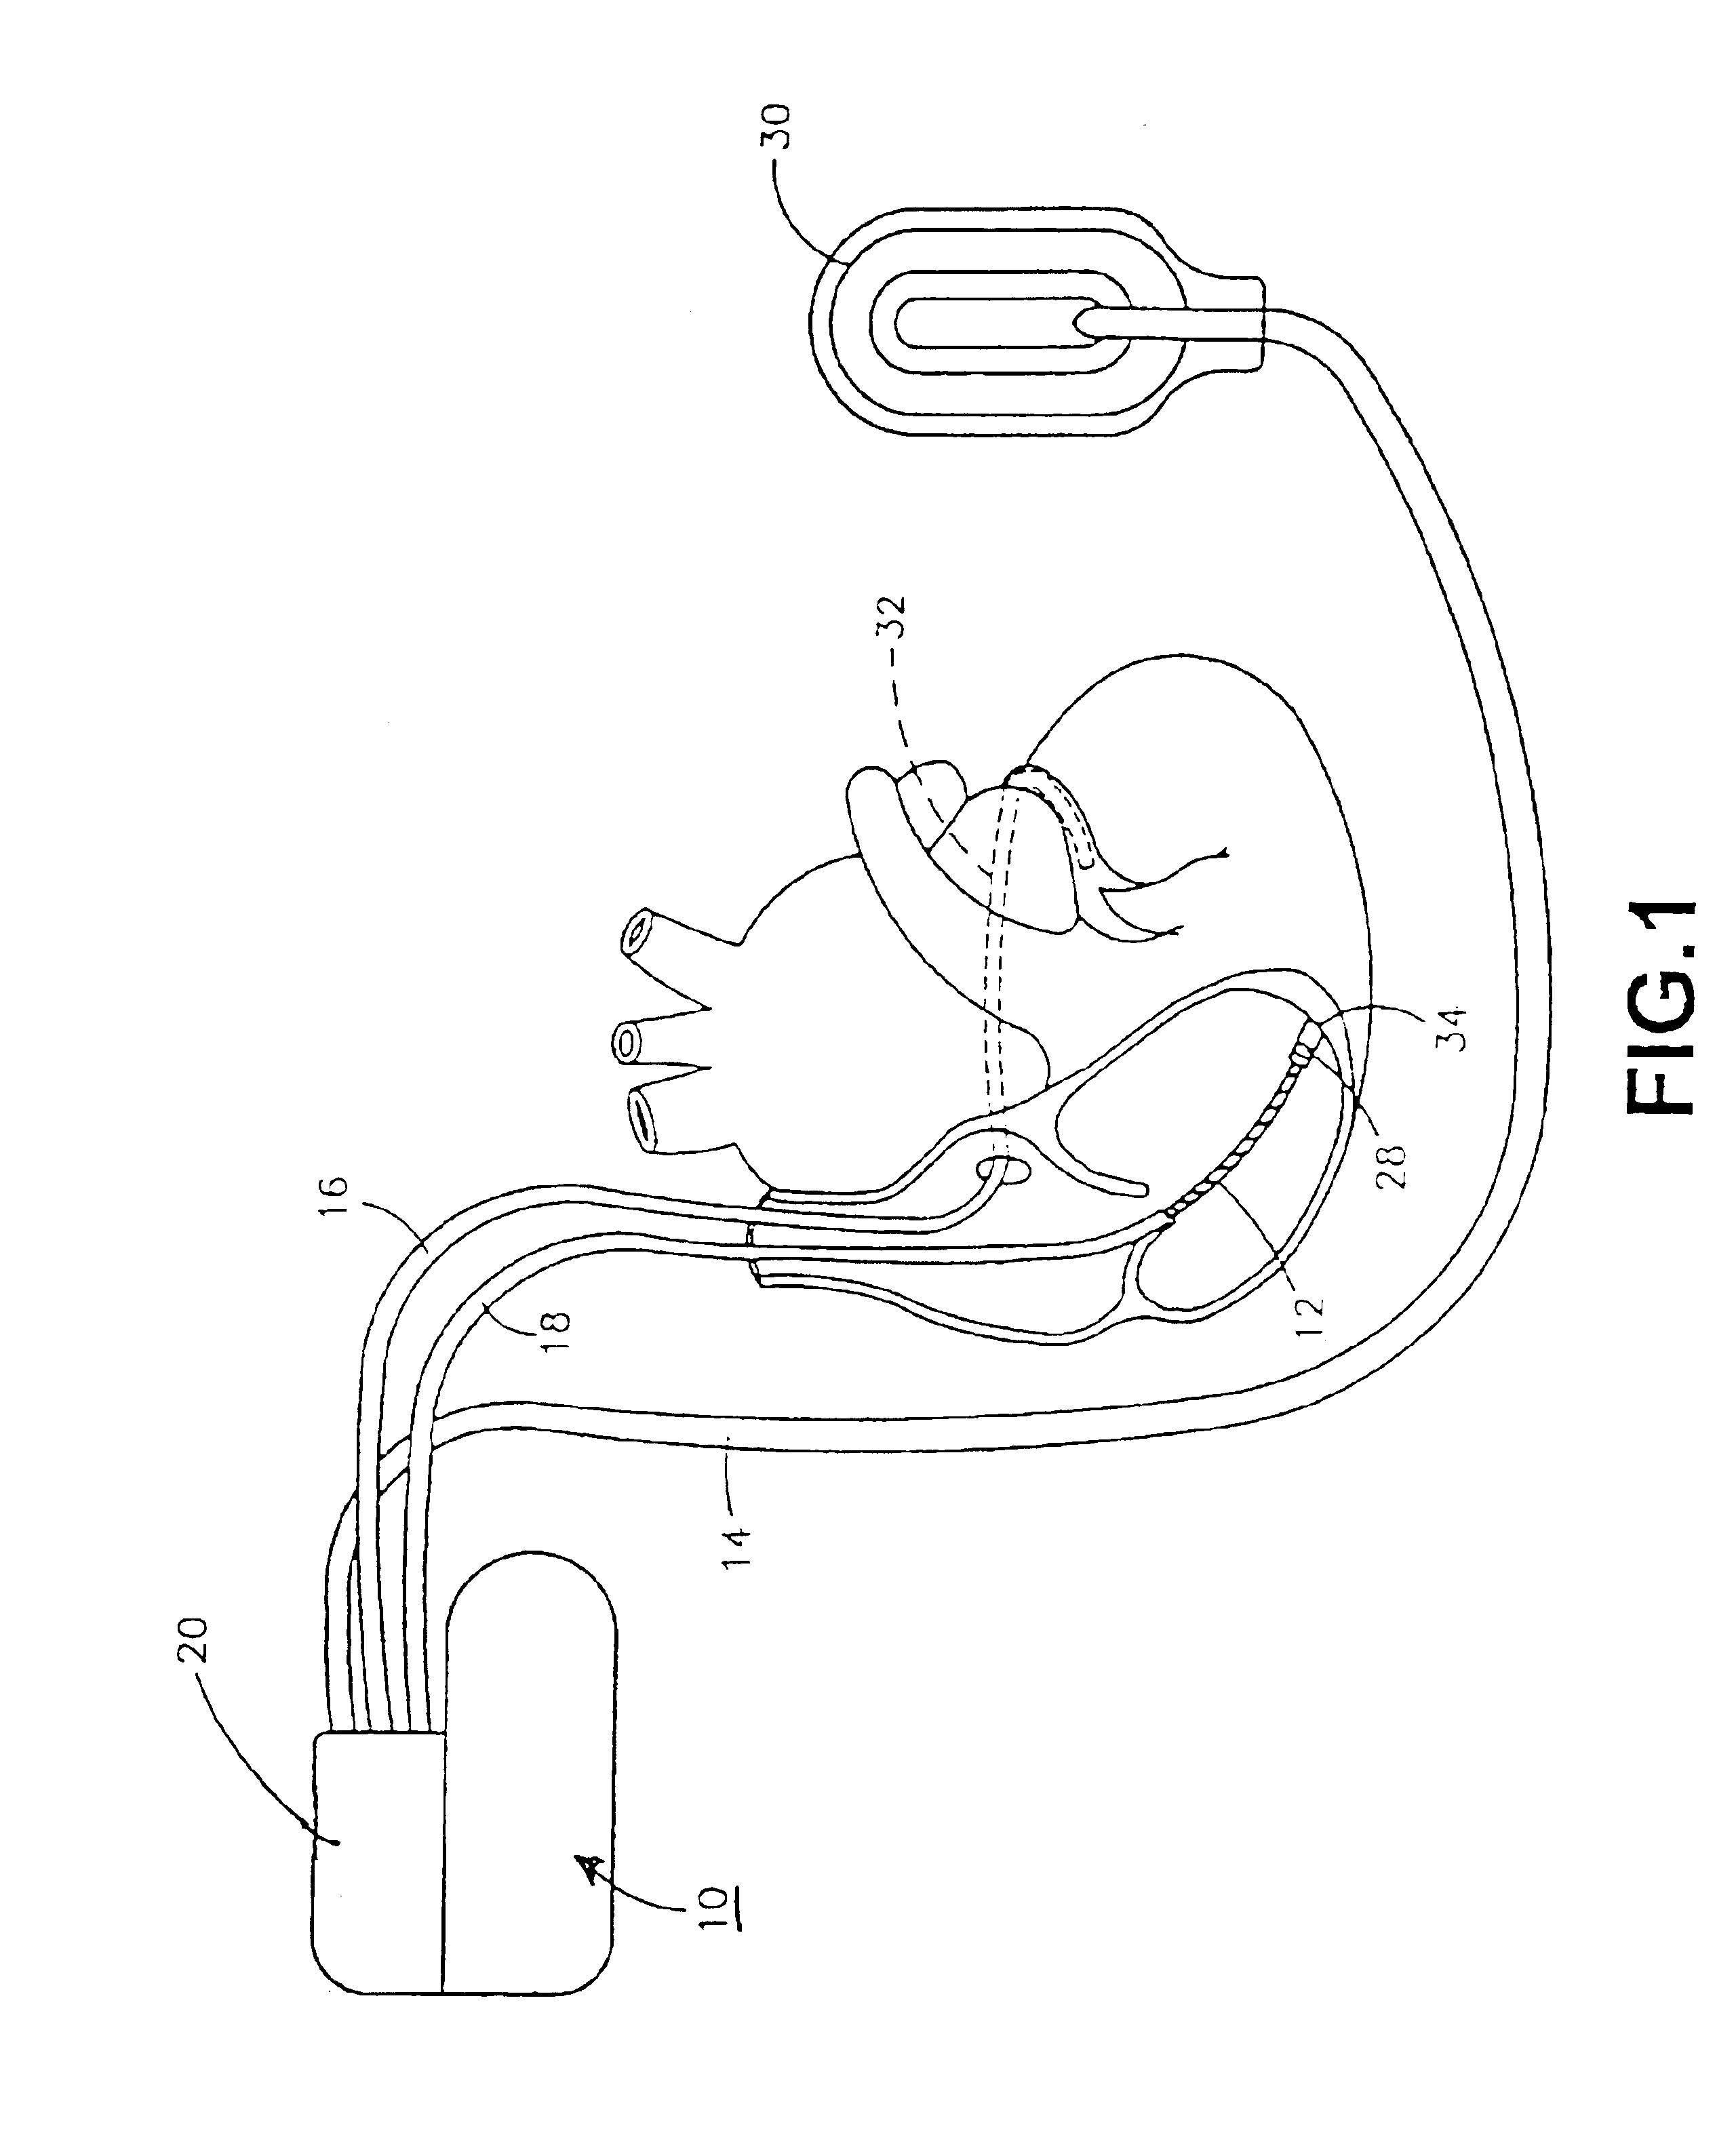 Implantable medical device having flat electrolytic capacitor with differing sized anode and cathode layers